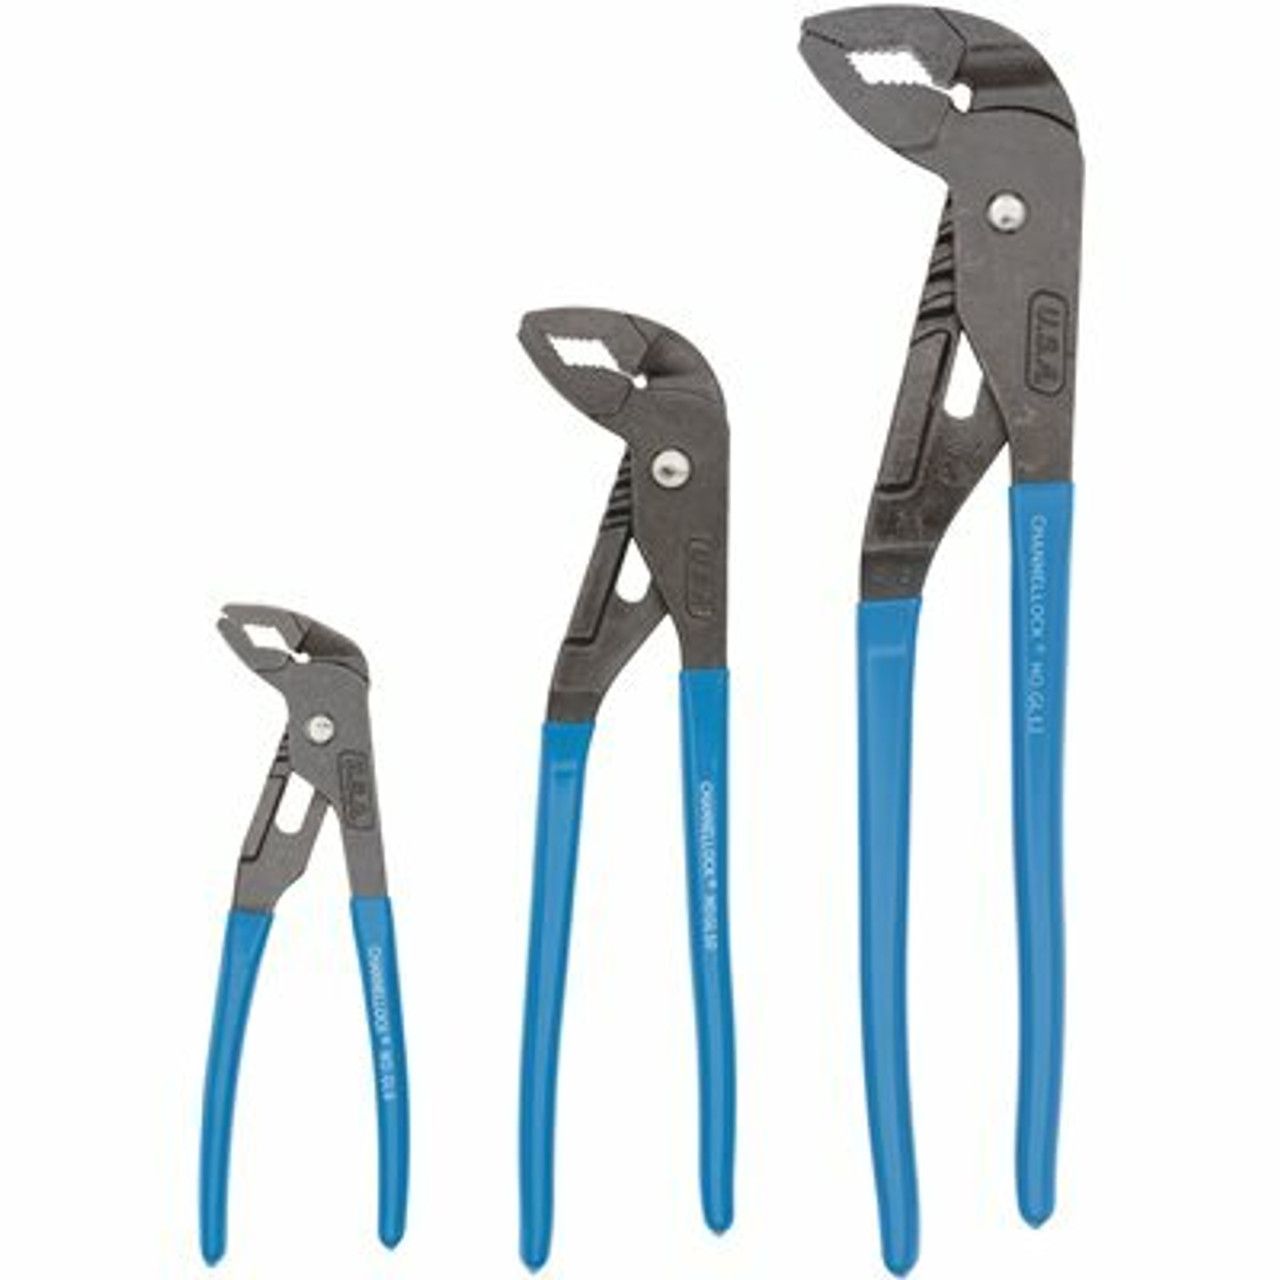 Channellock Tongue And Groove Plier Set (3-Piece)